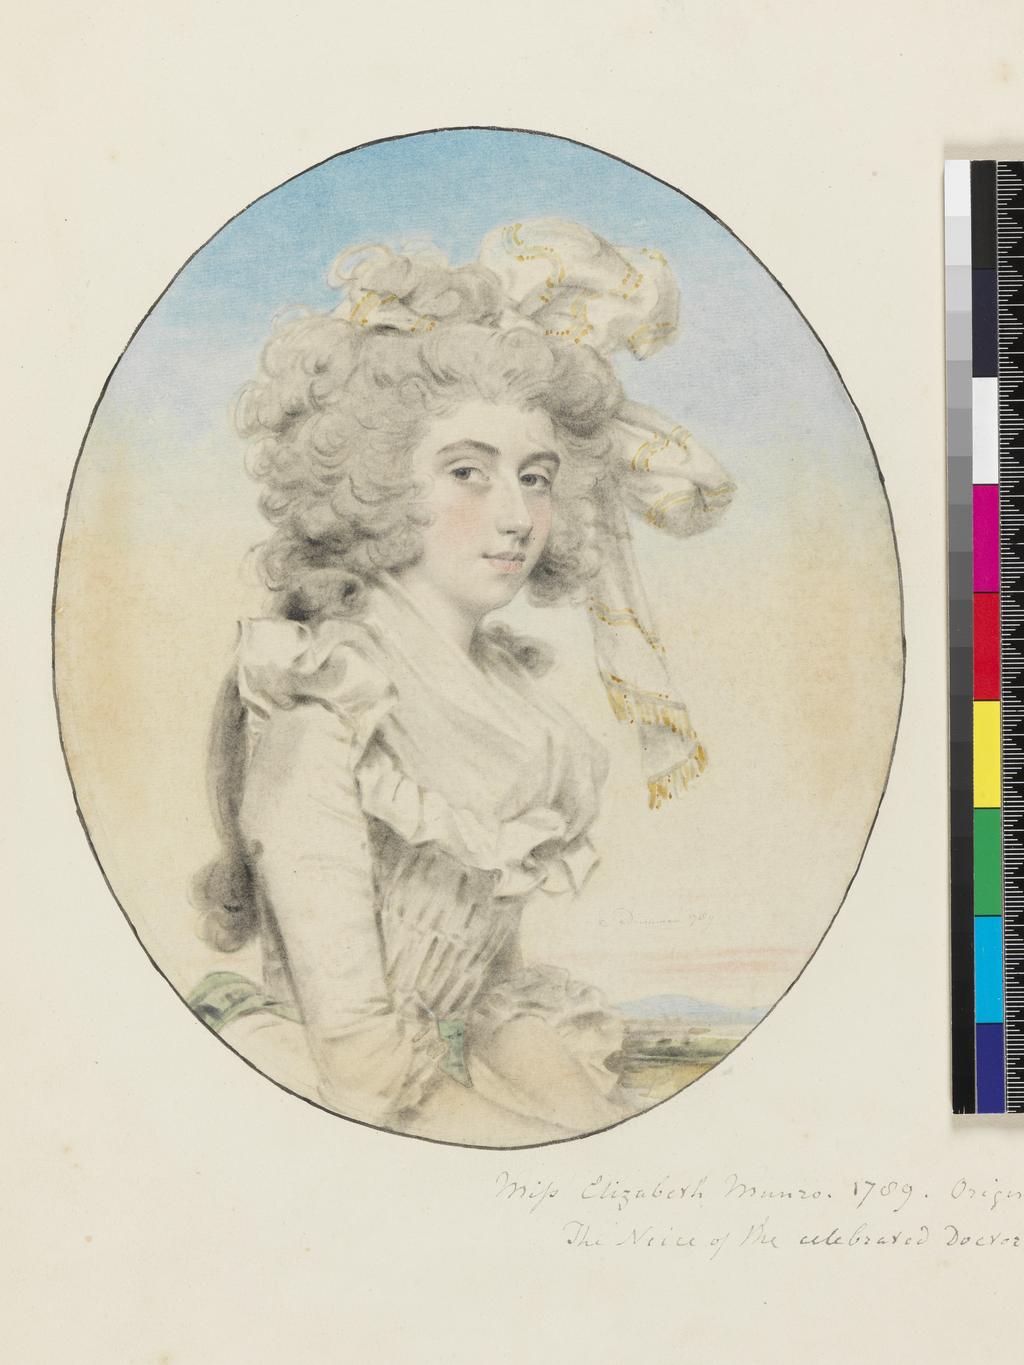 An image of Miss Elizabeth Monro. Downman, John (British, 1750-1824). Laid down on recto of album sheet, surrounded by drawn ink line. Black and red chalk, with stump, watercolour and white highlights on paper, laid down (chalk and/or watercolour applied to verso), height 213 mm, width 176 mm, 1789.